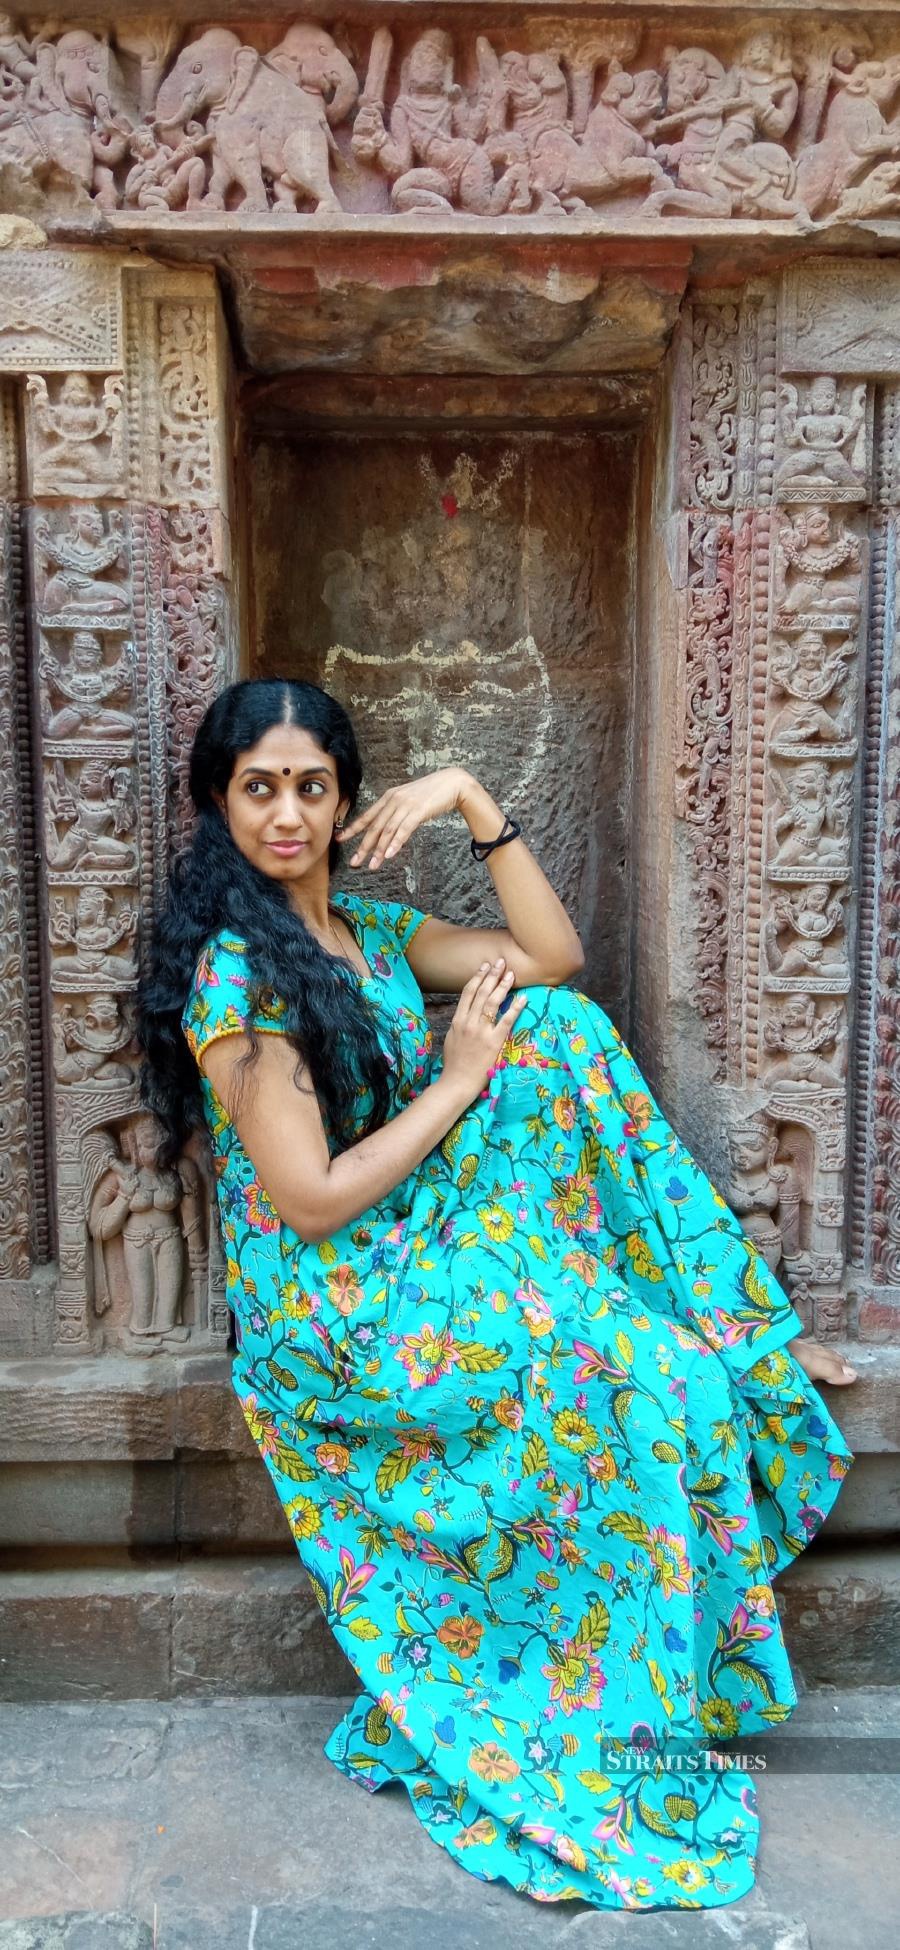  Geethika Sree, the assistant to the artistic director posing against the backdrop of a temple sculpture.